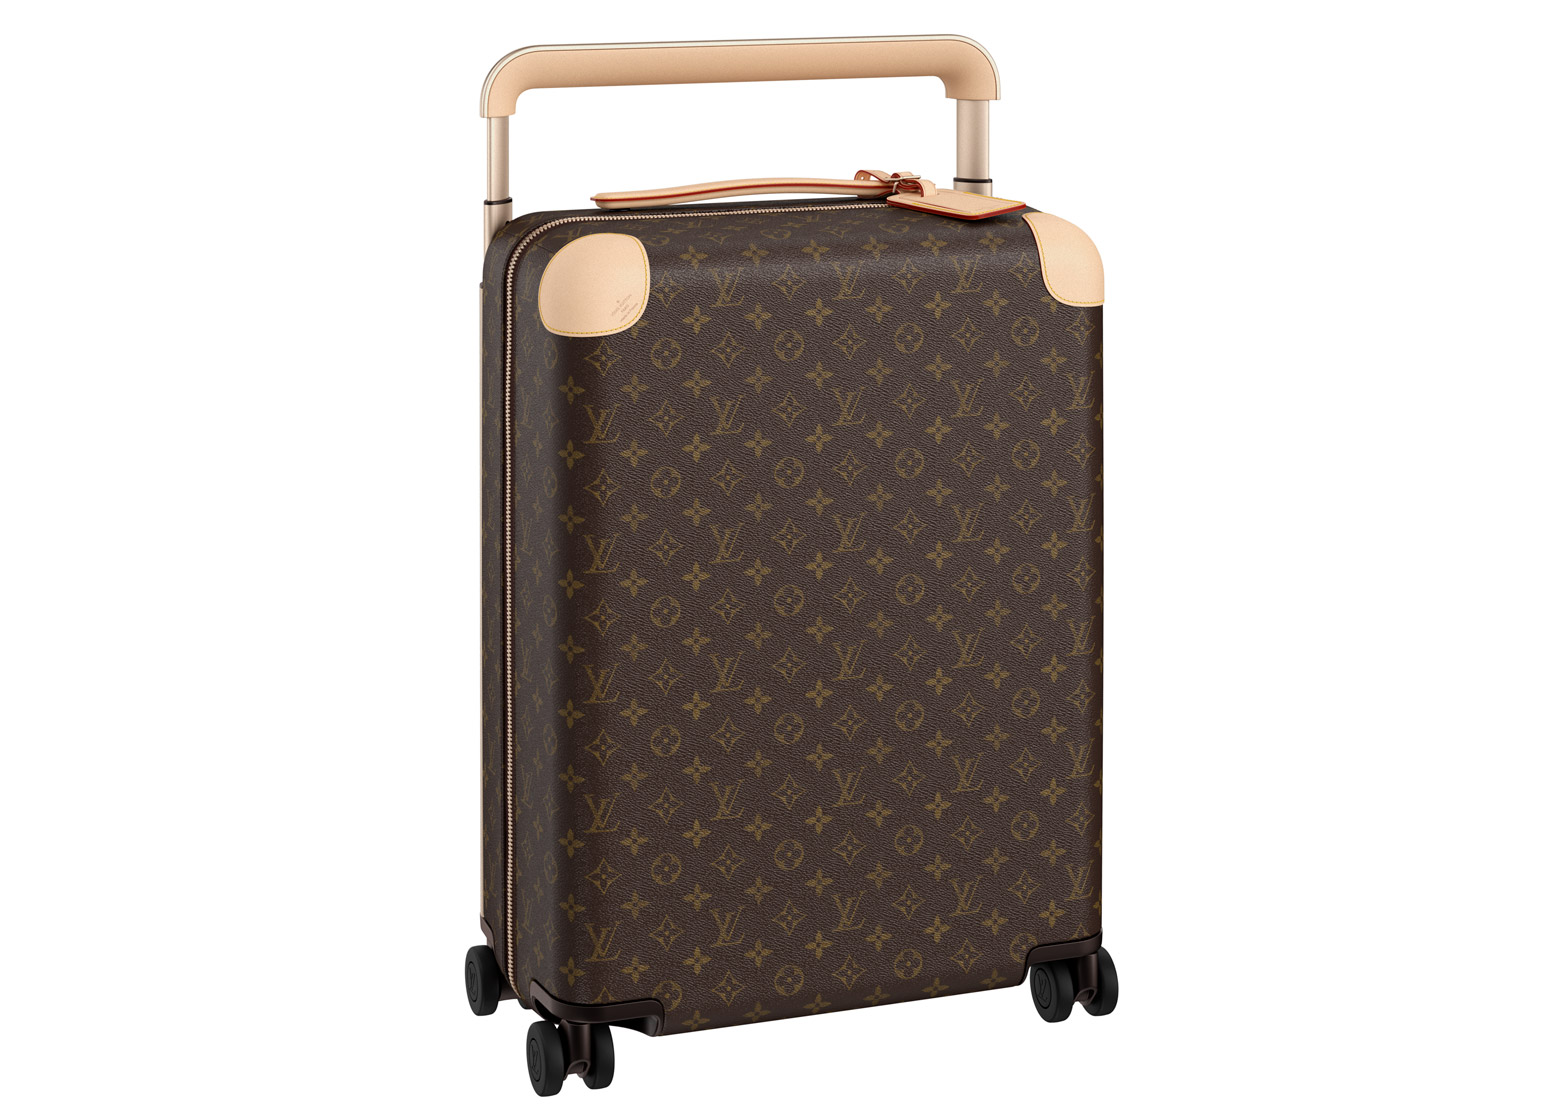 louis-vuitton-lv-rolling-luggage-suitcase-marc-newson-product-design-colour-hard-shell-trunk-lightweight-cabin-bag_.jpg